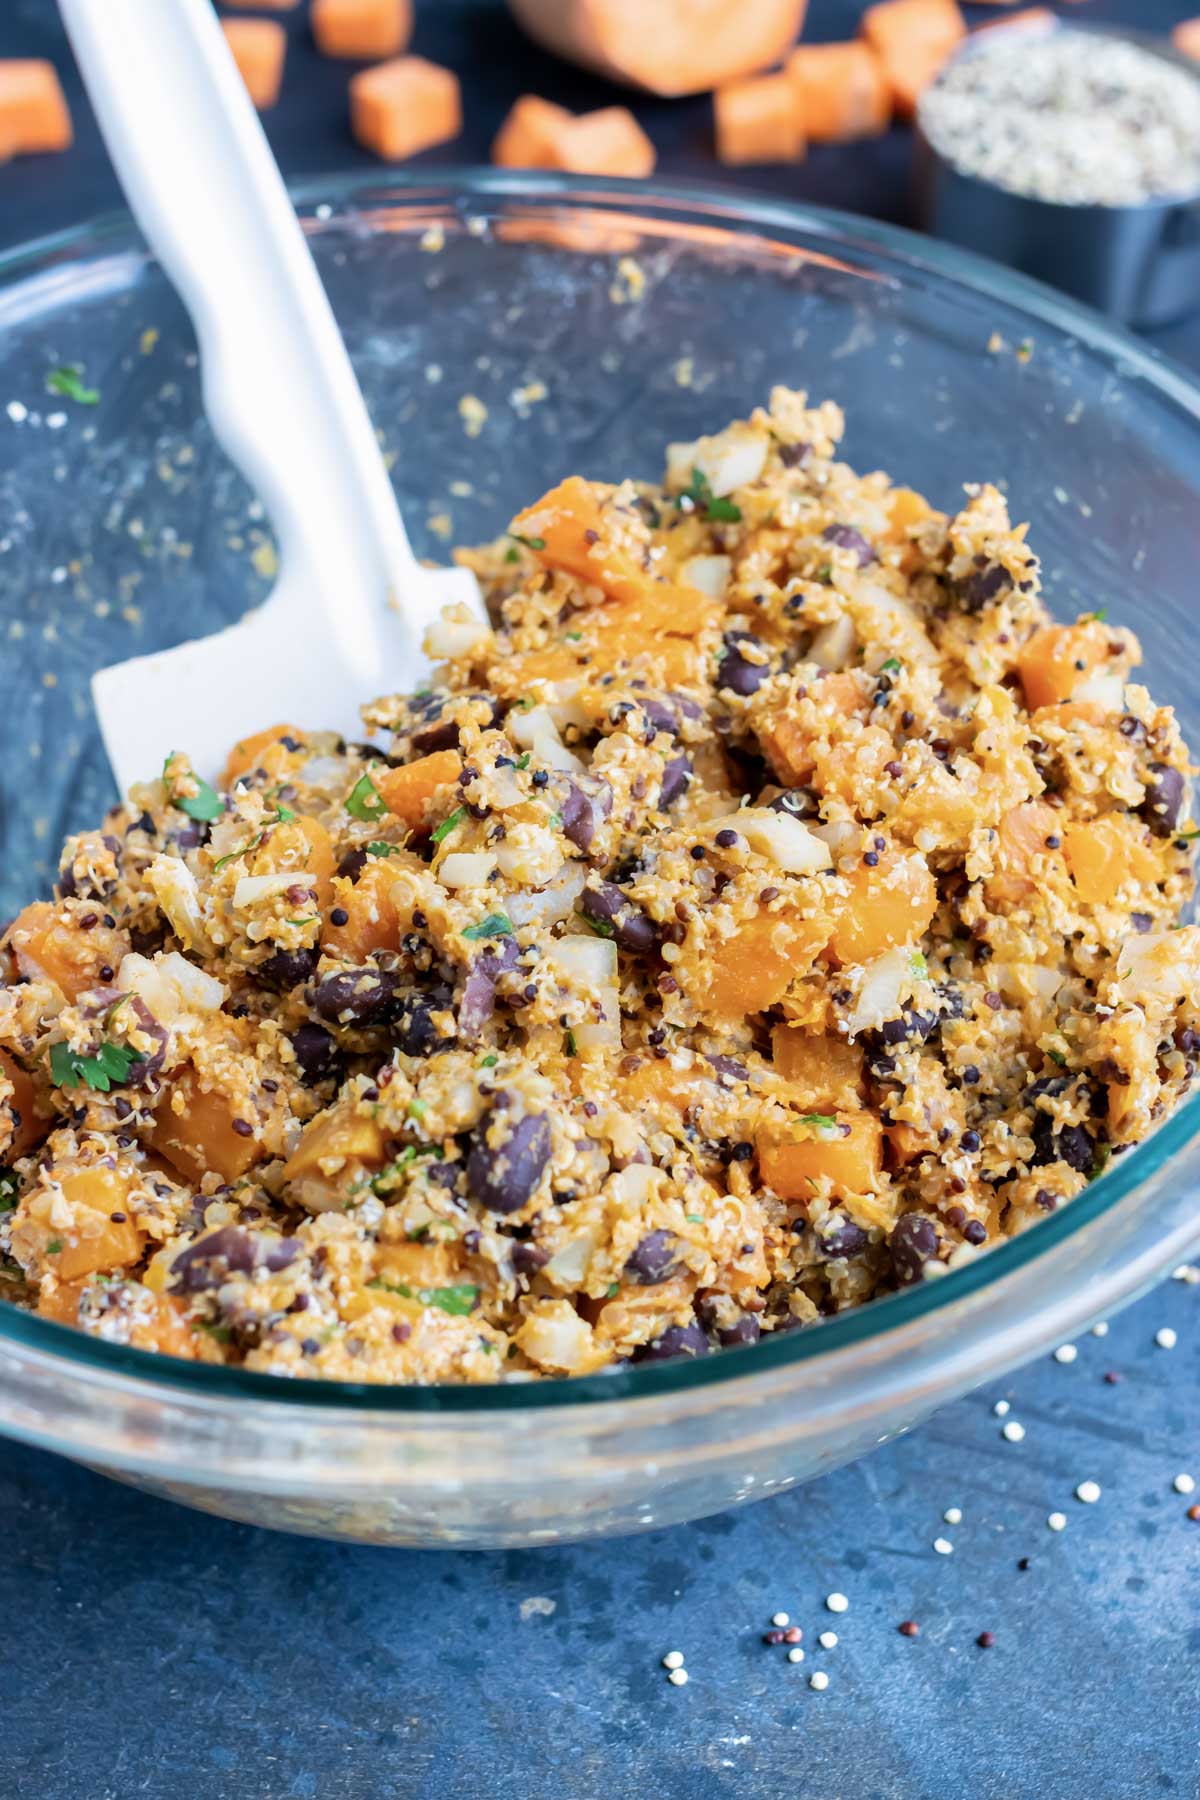 Sweet potatoes, black beans, oat flour, and quinoa in a bowl being mixed.